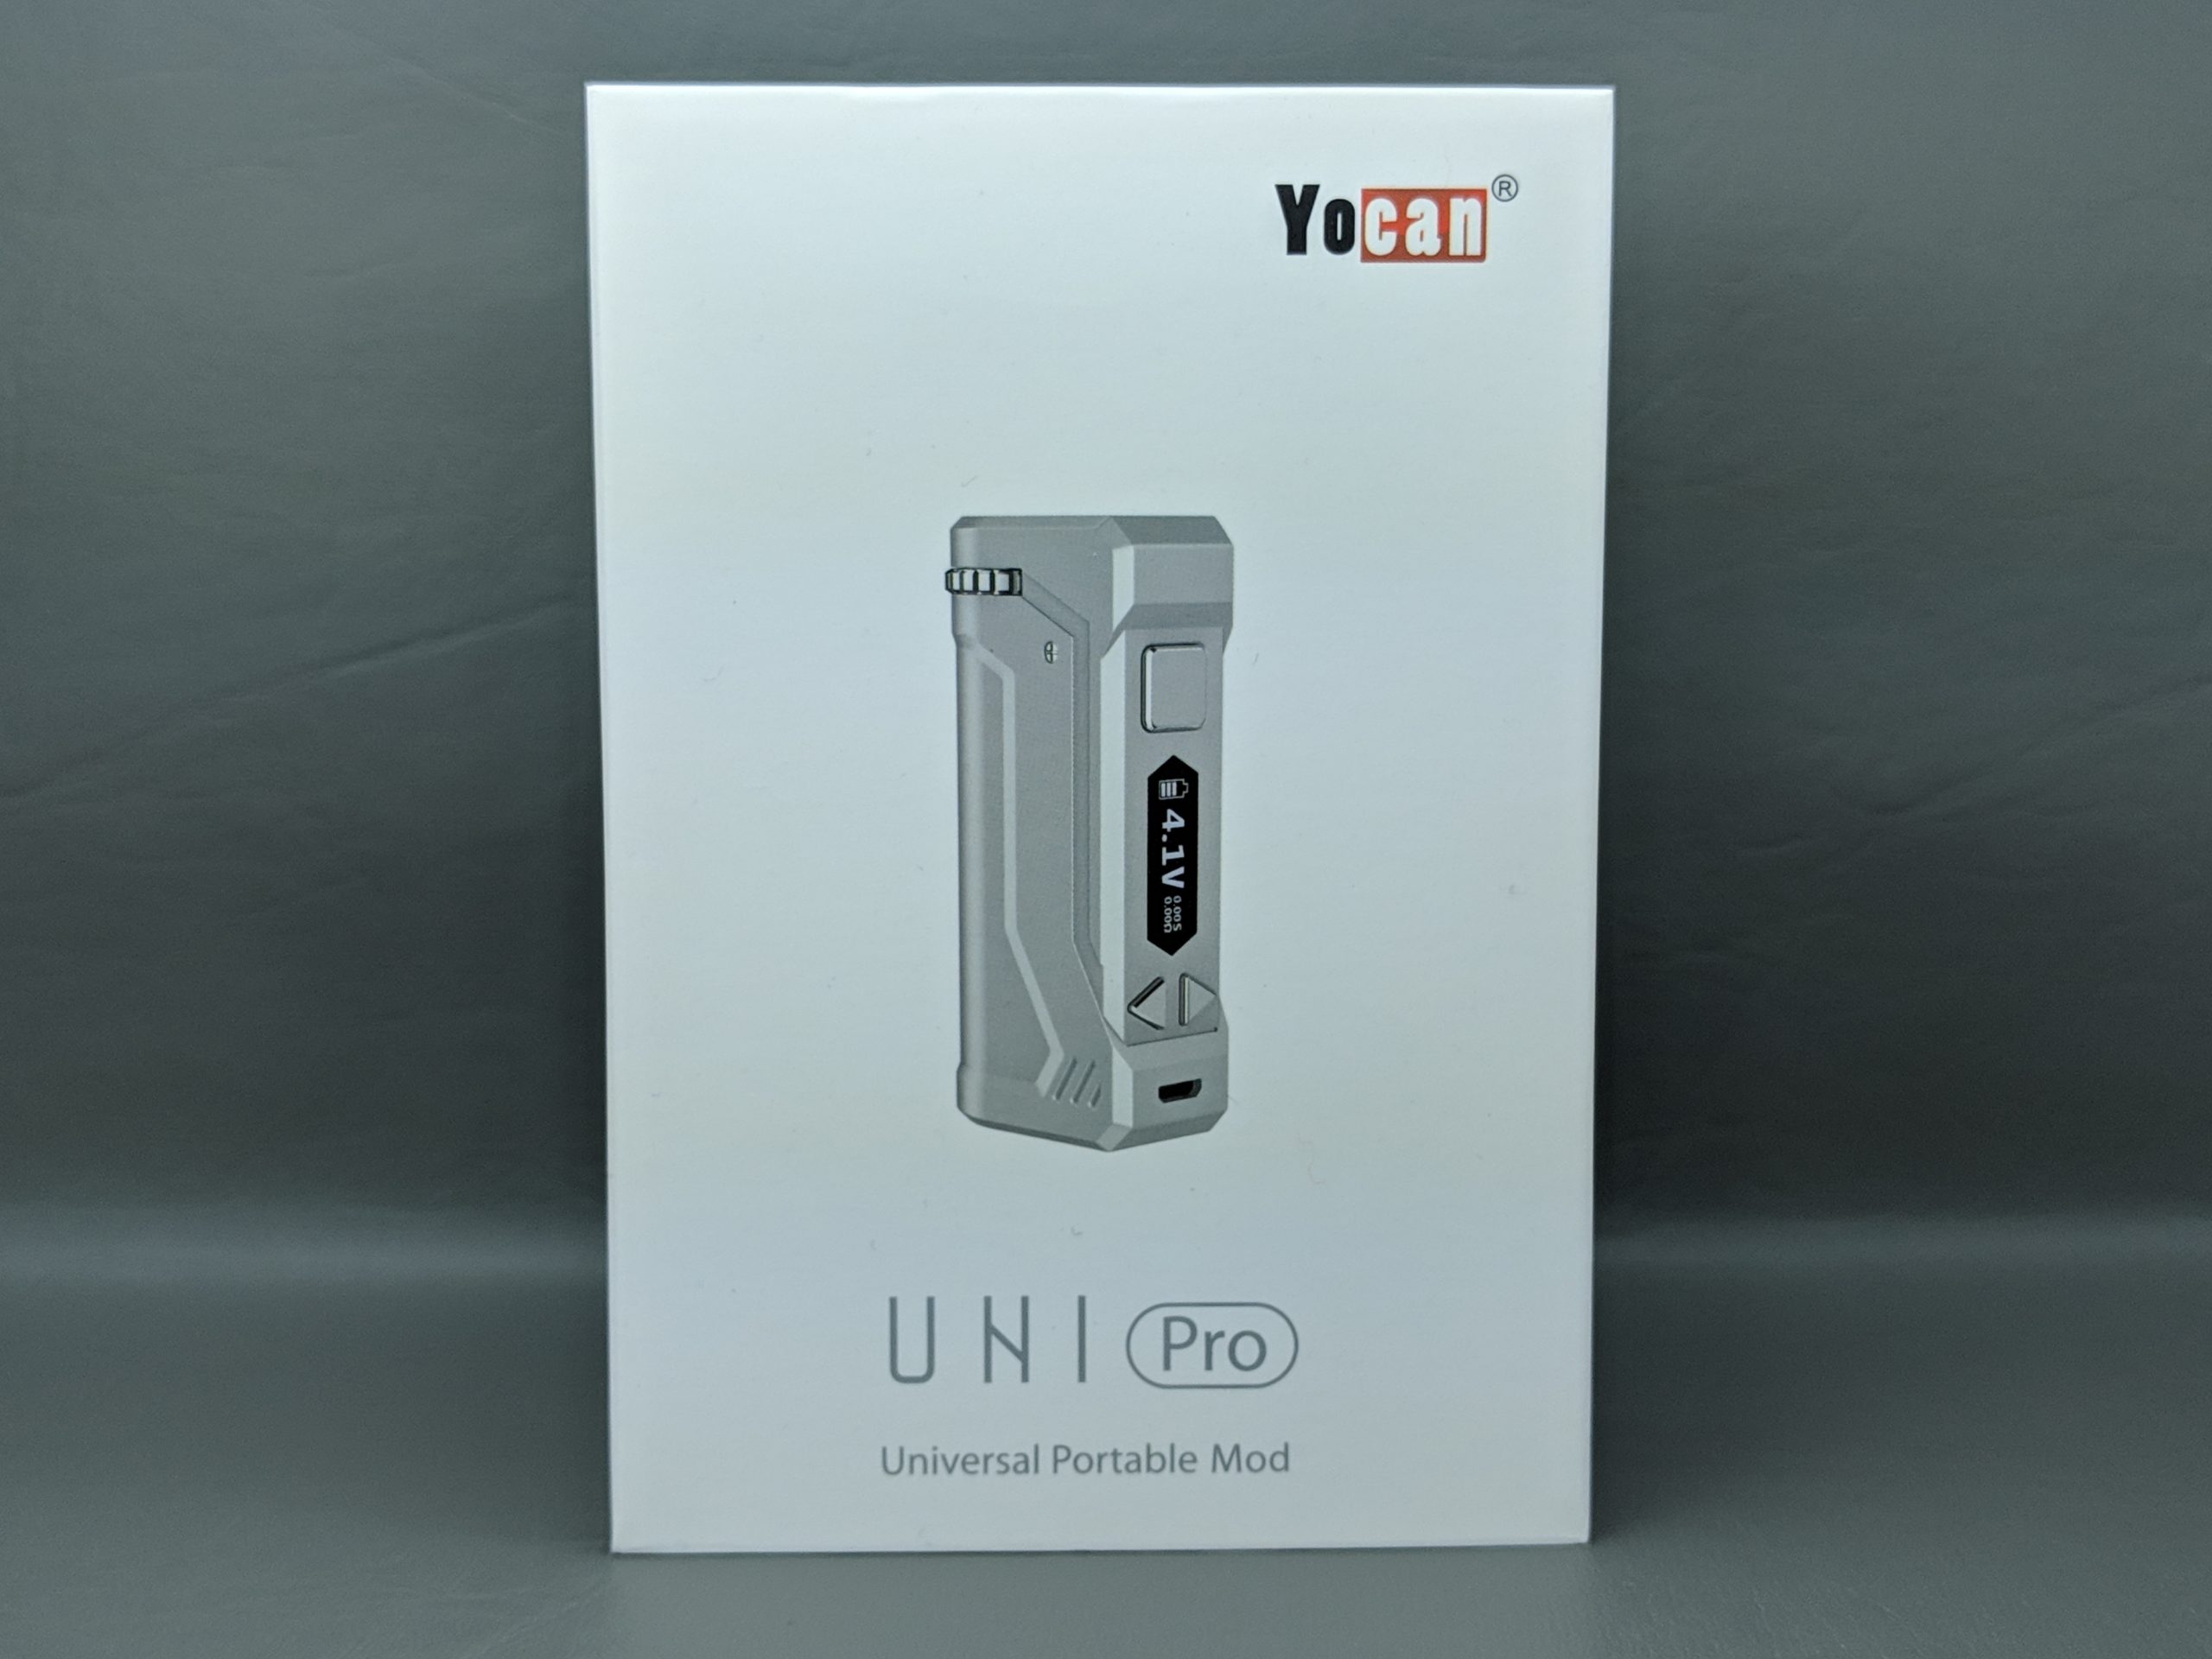 The Yocan Uni Pro | The Vape Review Canada